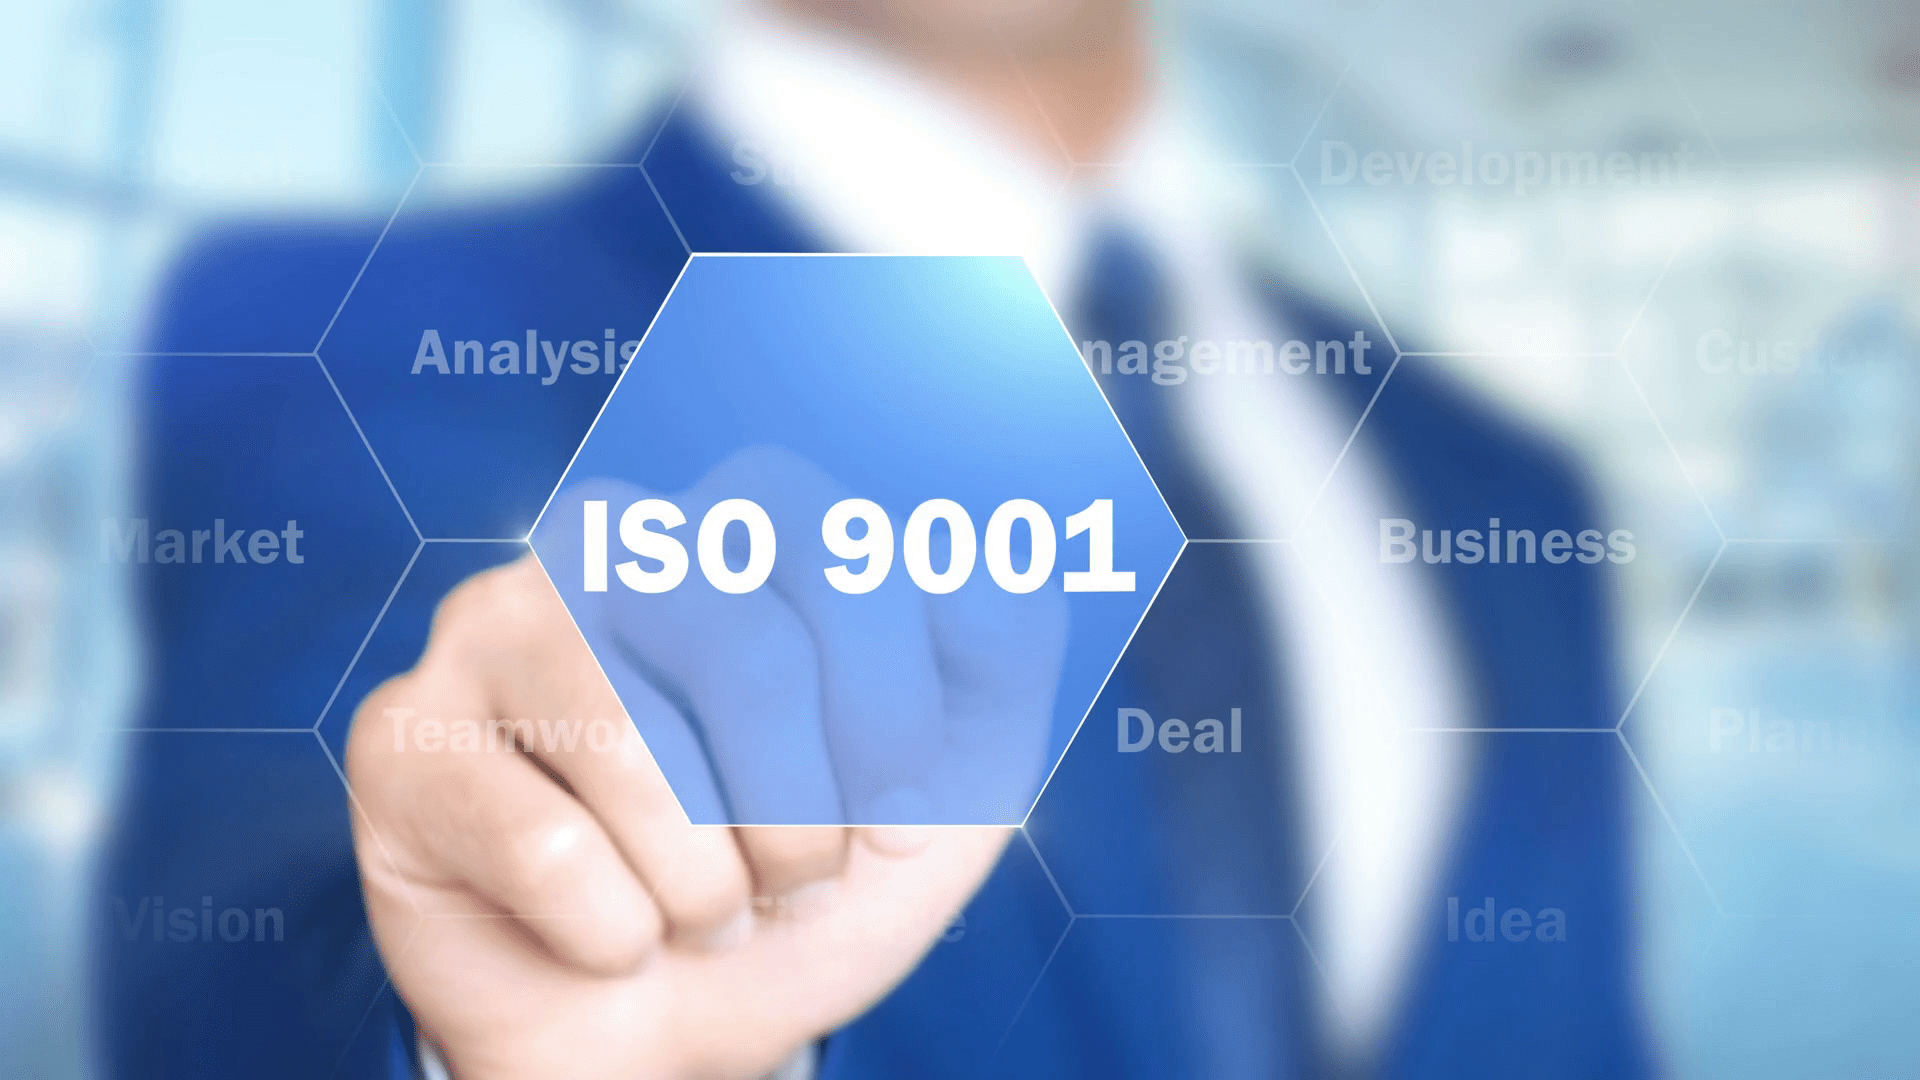 ISO 9001 Quality Management System Certification | Accurate Global